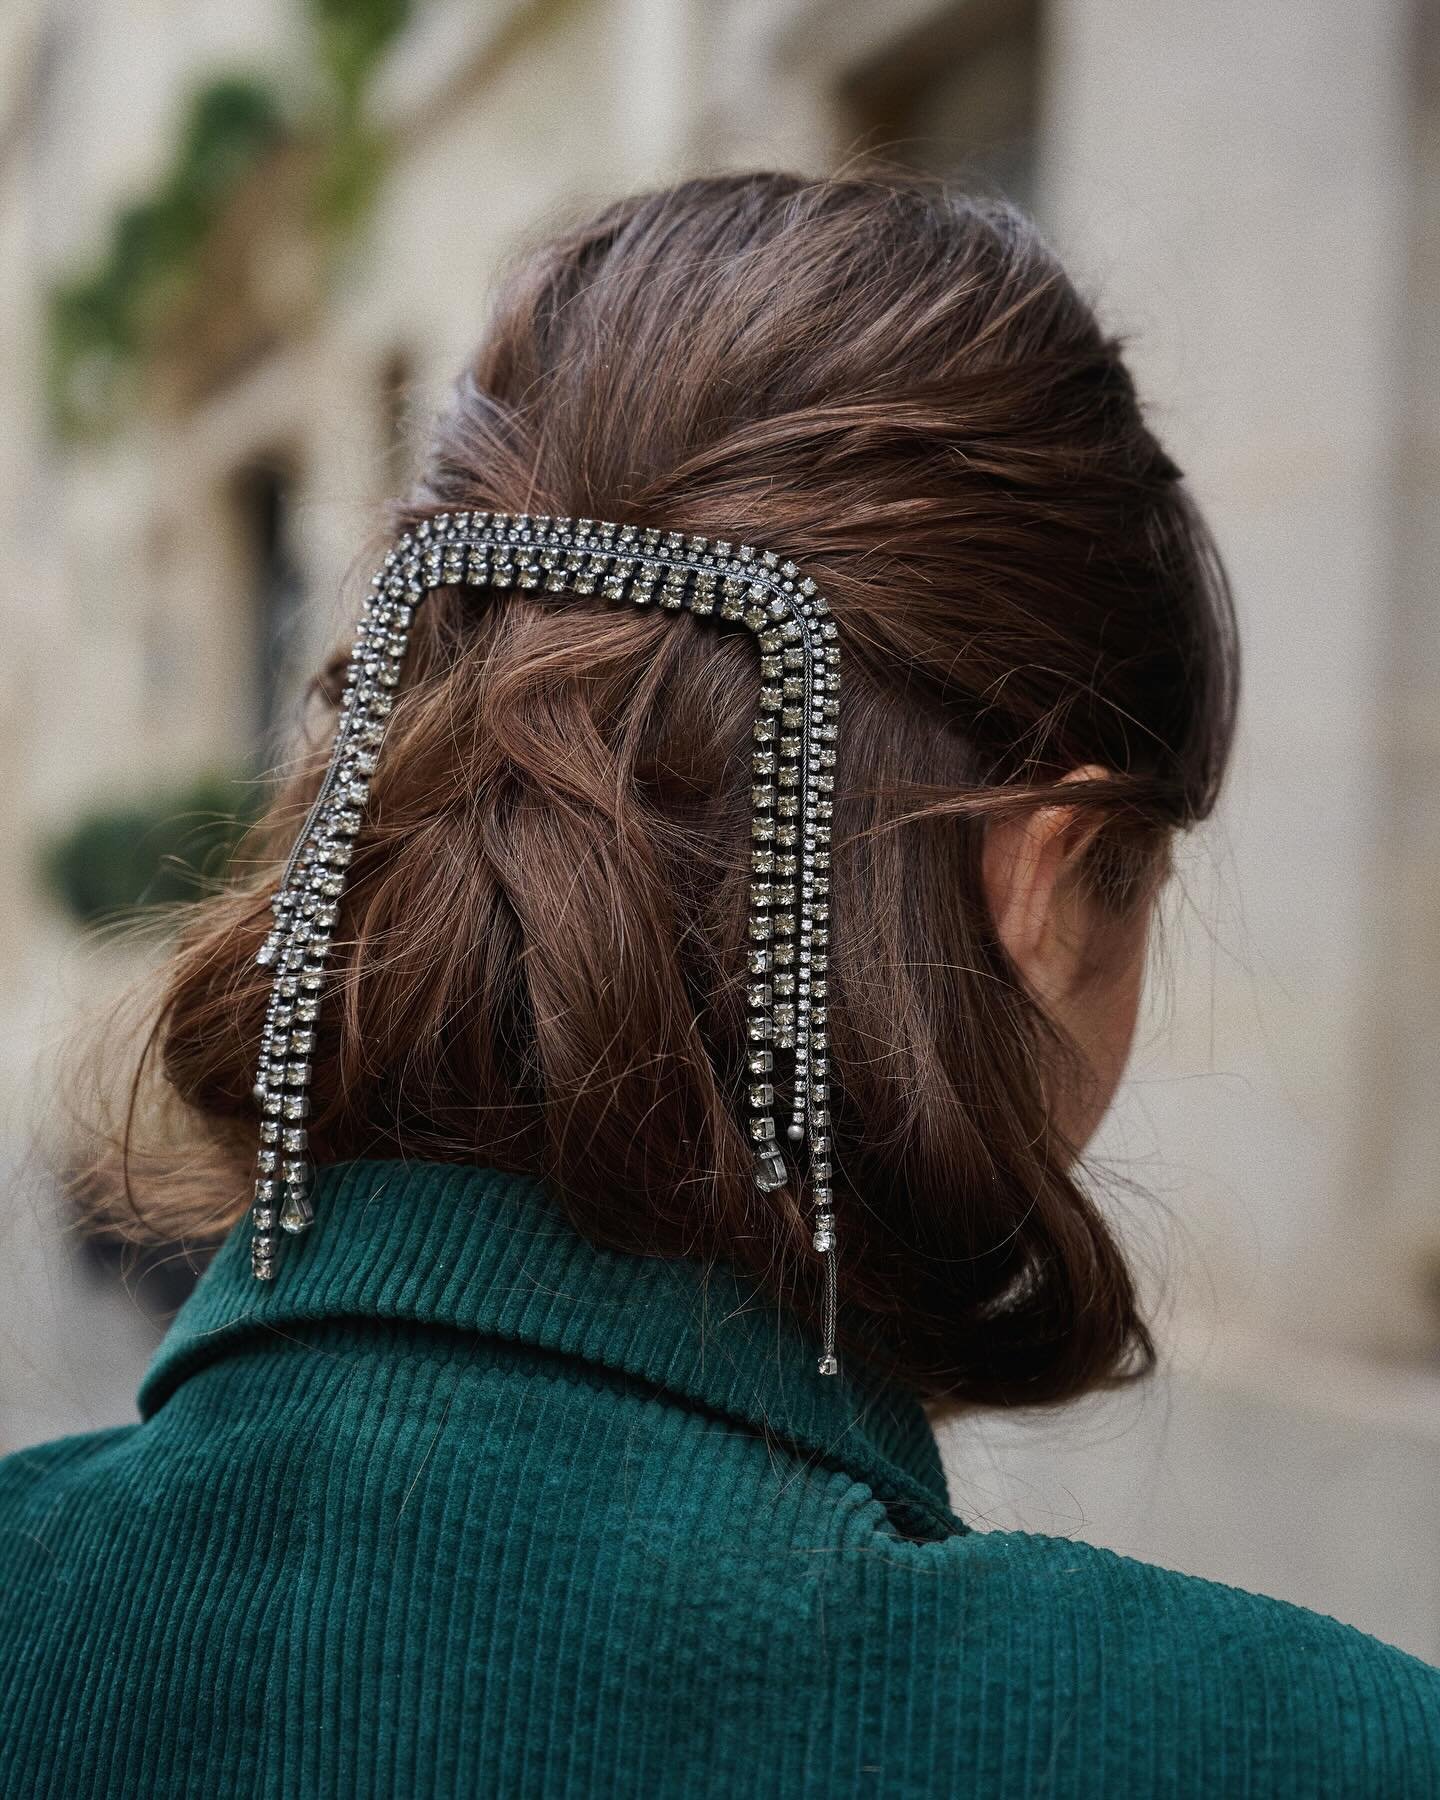 #hairjewelry by #juliedelibranparis ✨✨

Thoughtfully designed in Paris and crafted in Italy, they are perfect as a holiday gift for someone to elevate any ensemble.

Shop at the boutique, DM, and Whatsapp for all inquiries.

#JuliedeLibranParis